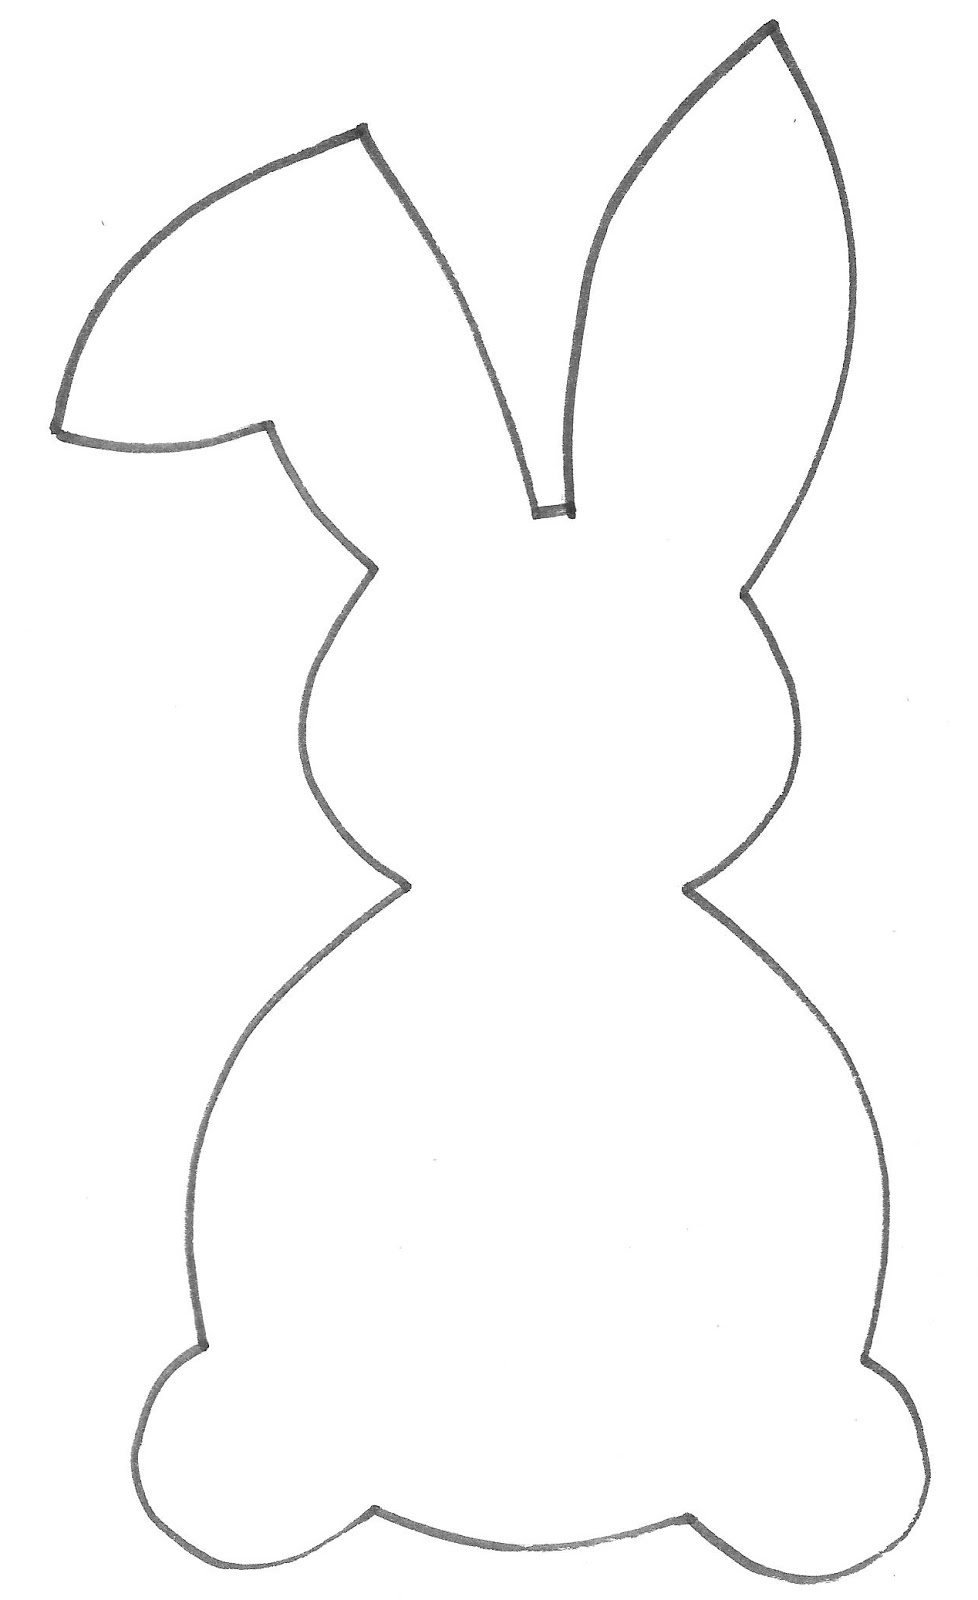 Free Rabbit Template, Download Free Rabbit Template png images, Free